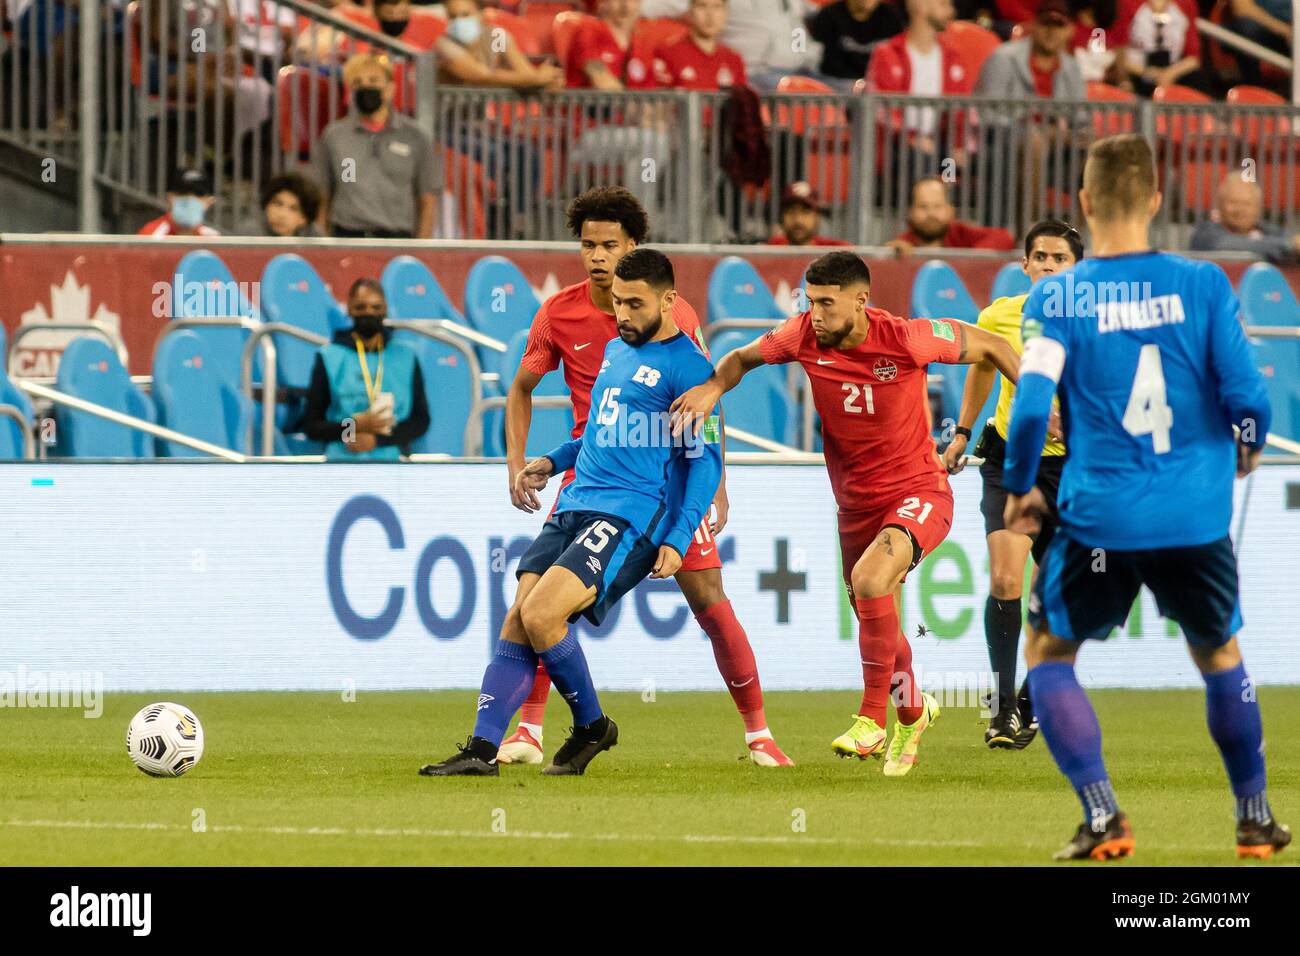 Toronto, Canada, September 8, 2021: Alex Roldan (No.15) of Team El Salvador in action against Jonathan Osorio (No.21) and Tajon Buchanan (No.11) of Team Canada during the CONCACAF FIFA World Cup Qualifying 2022 match at BMO Field in Toronto, Canada. Canada won the match 3-0. Stock Photo